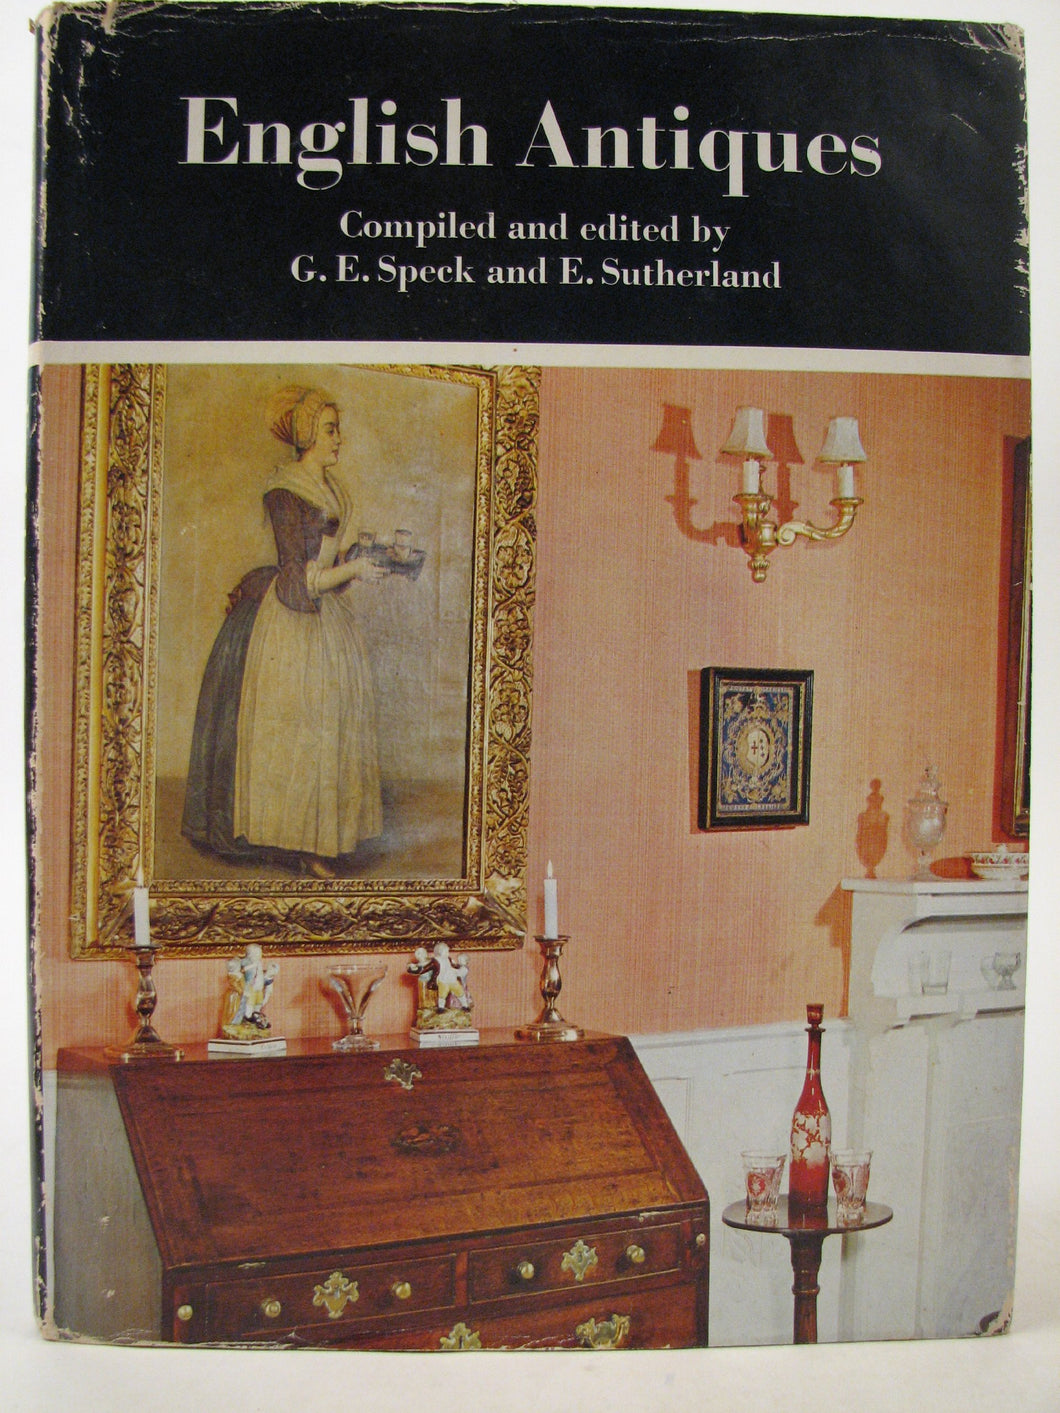 English Antiques [Hardcover] Compiled and Edited By G. E. Speck and Euan Sutherland.